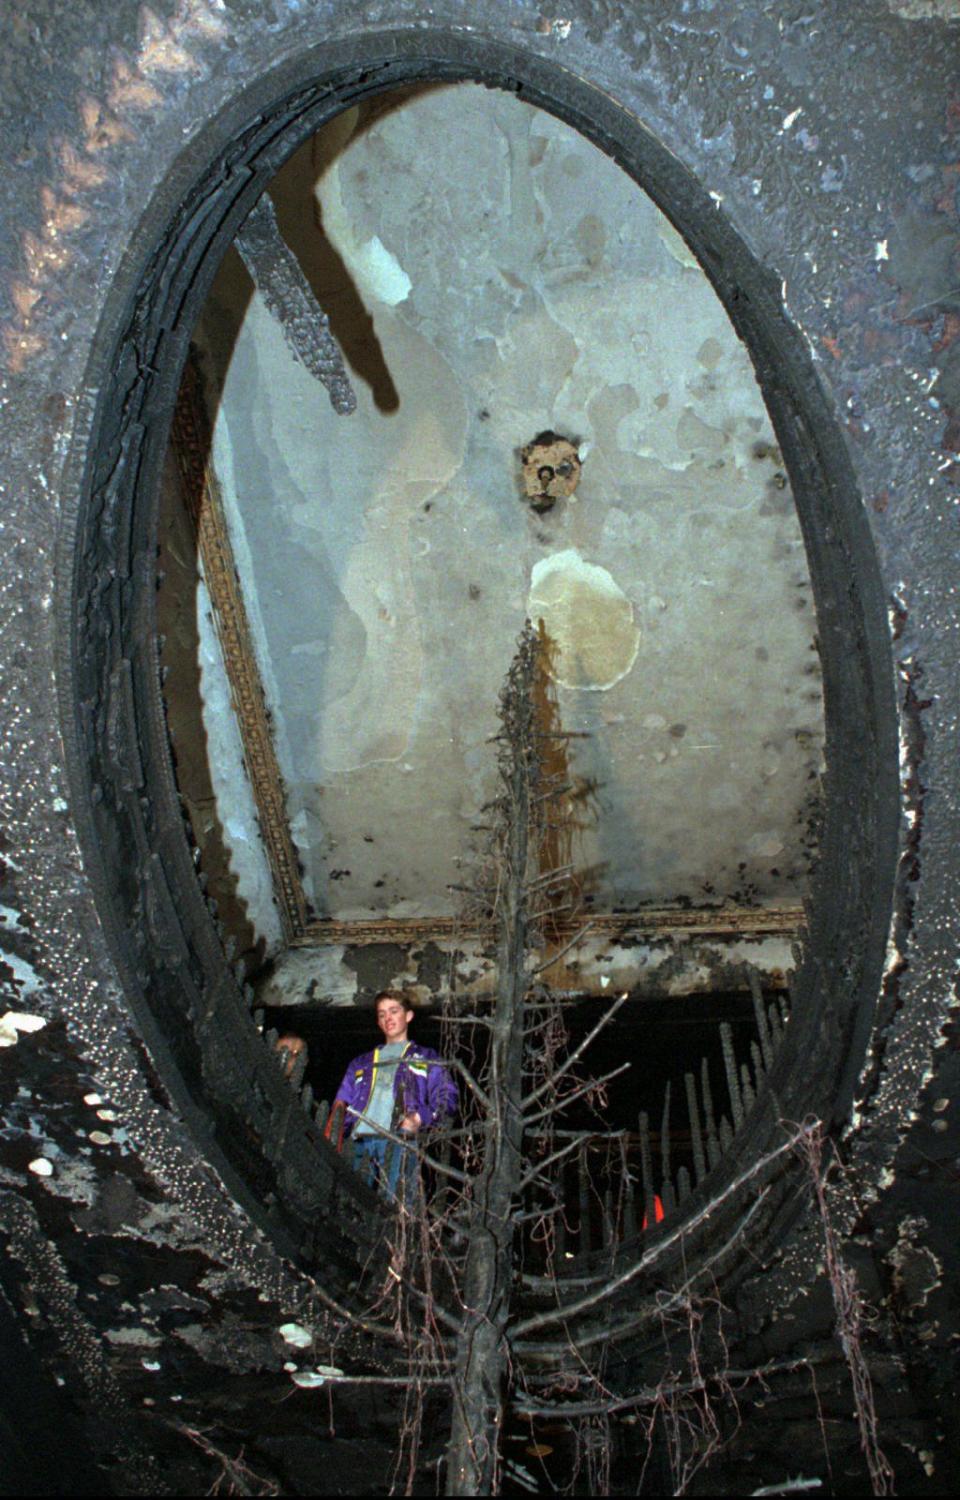 Utah state Governor’s son, Taylor Leavitt, looks at damage done from christmas tree fire at the Governor’s mansion Wednesday, Dec. 15, 1993, before going into his room to inspect the damage. The four-alarm blaze caused more than 1 million dollars worth of damage and destroyed irreplaceable art and antiques. | Jeffrey D. Allred, Deseret News